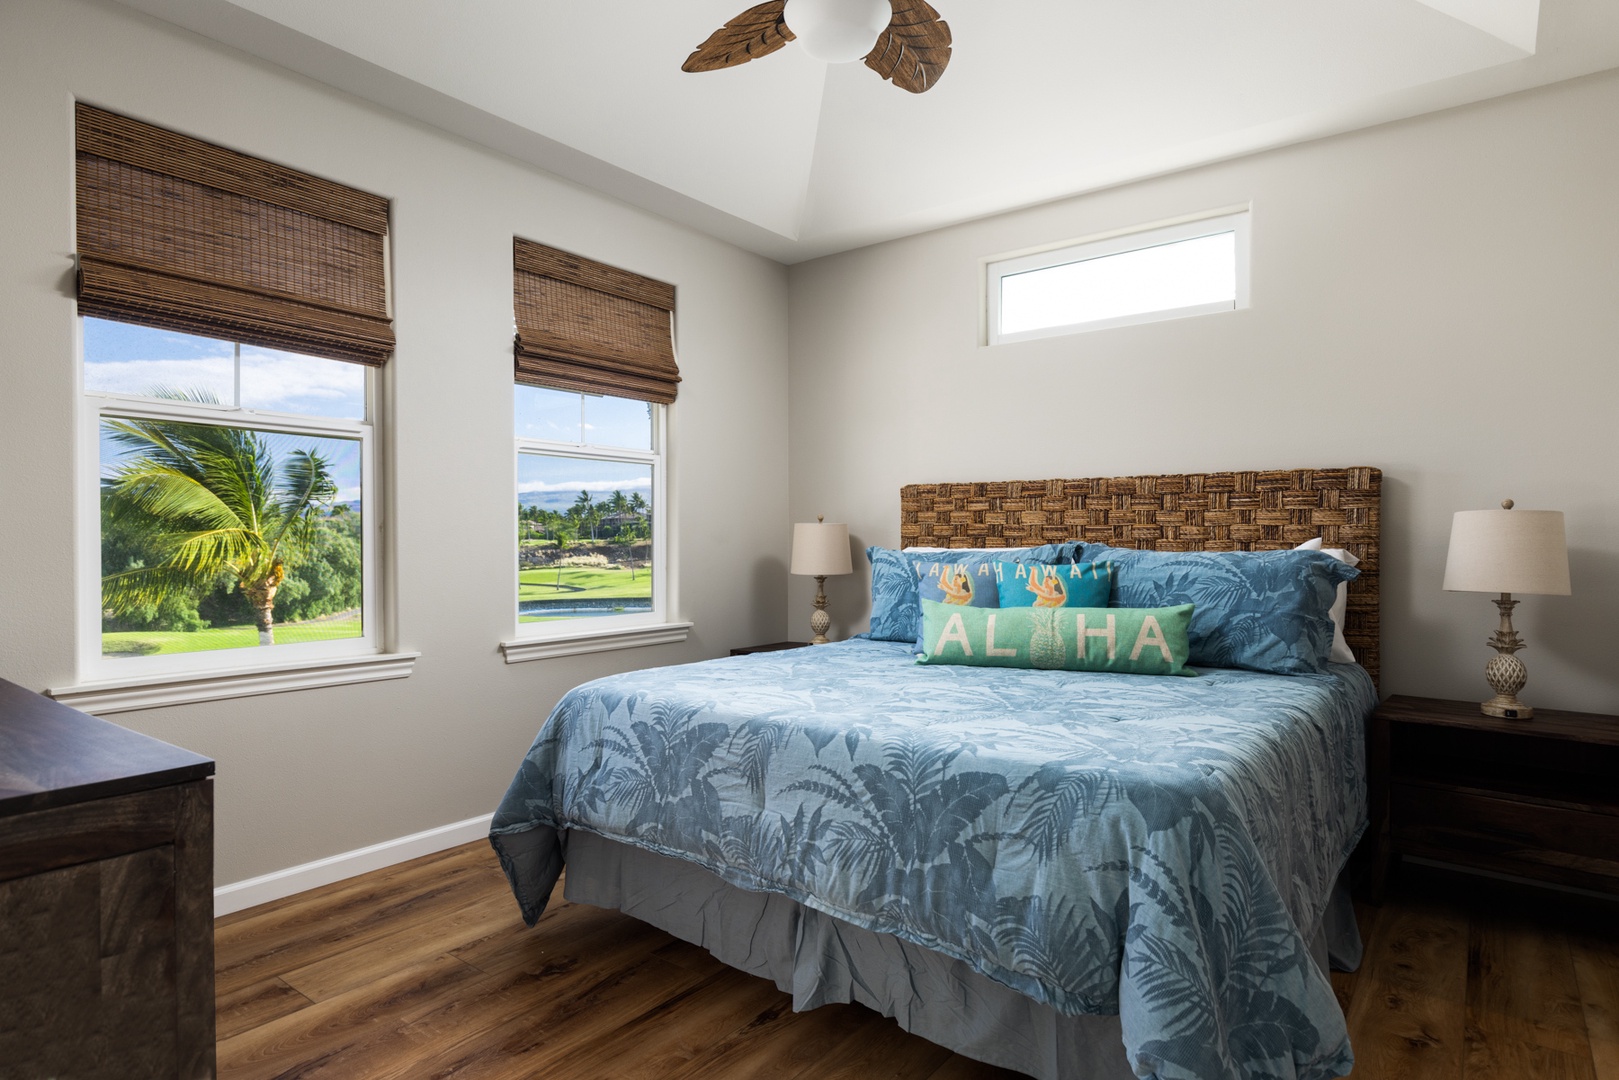 Waikoloa Vacation Rentals, Fairway Villas at Waikoloa Beach Resort E34 - This spacious primary bedroom has scenic views of the fairway and mountains